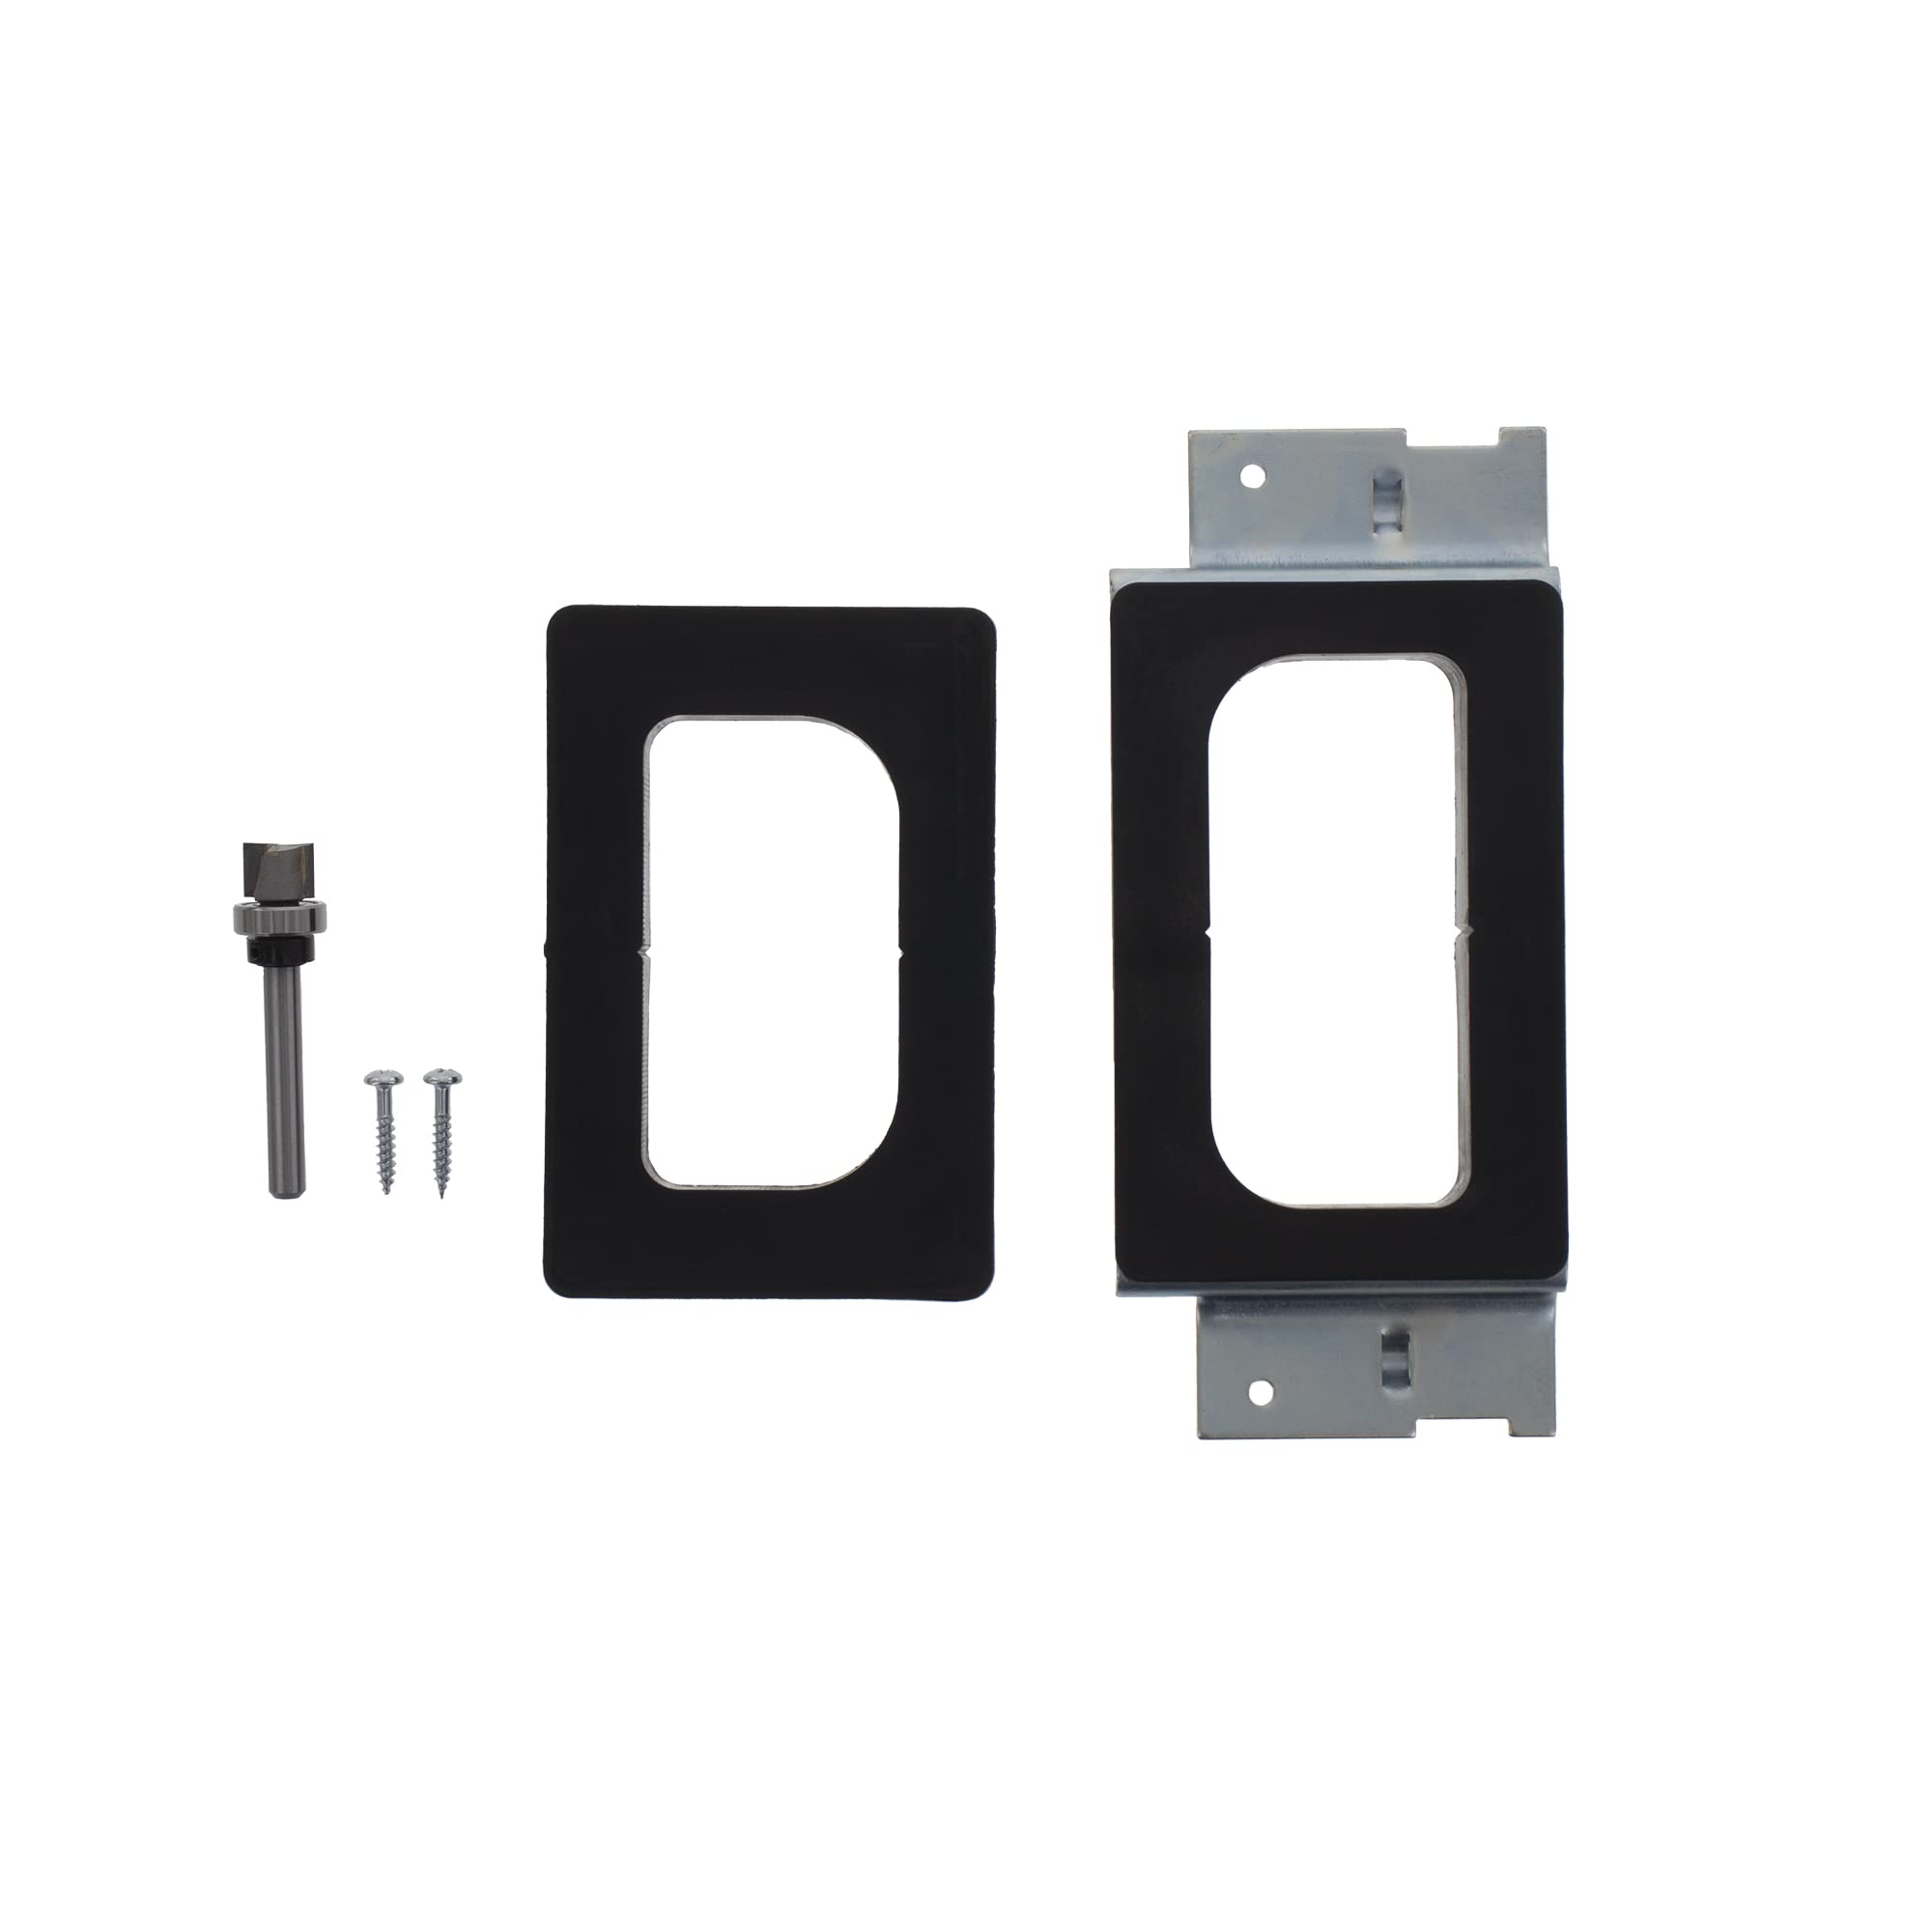 Book Cover Milescraft 1222 Hinge Mate 150 – Door Hinge Installation Kit/Mortiser Template for Use on Doors and Jambs